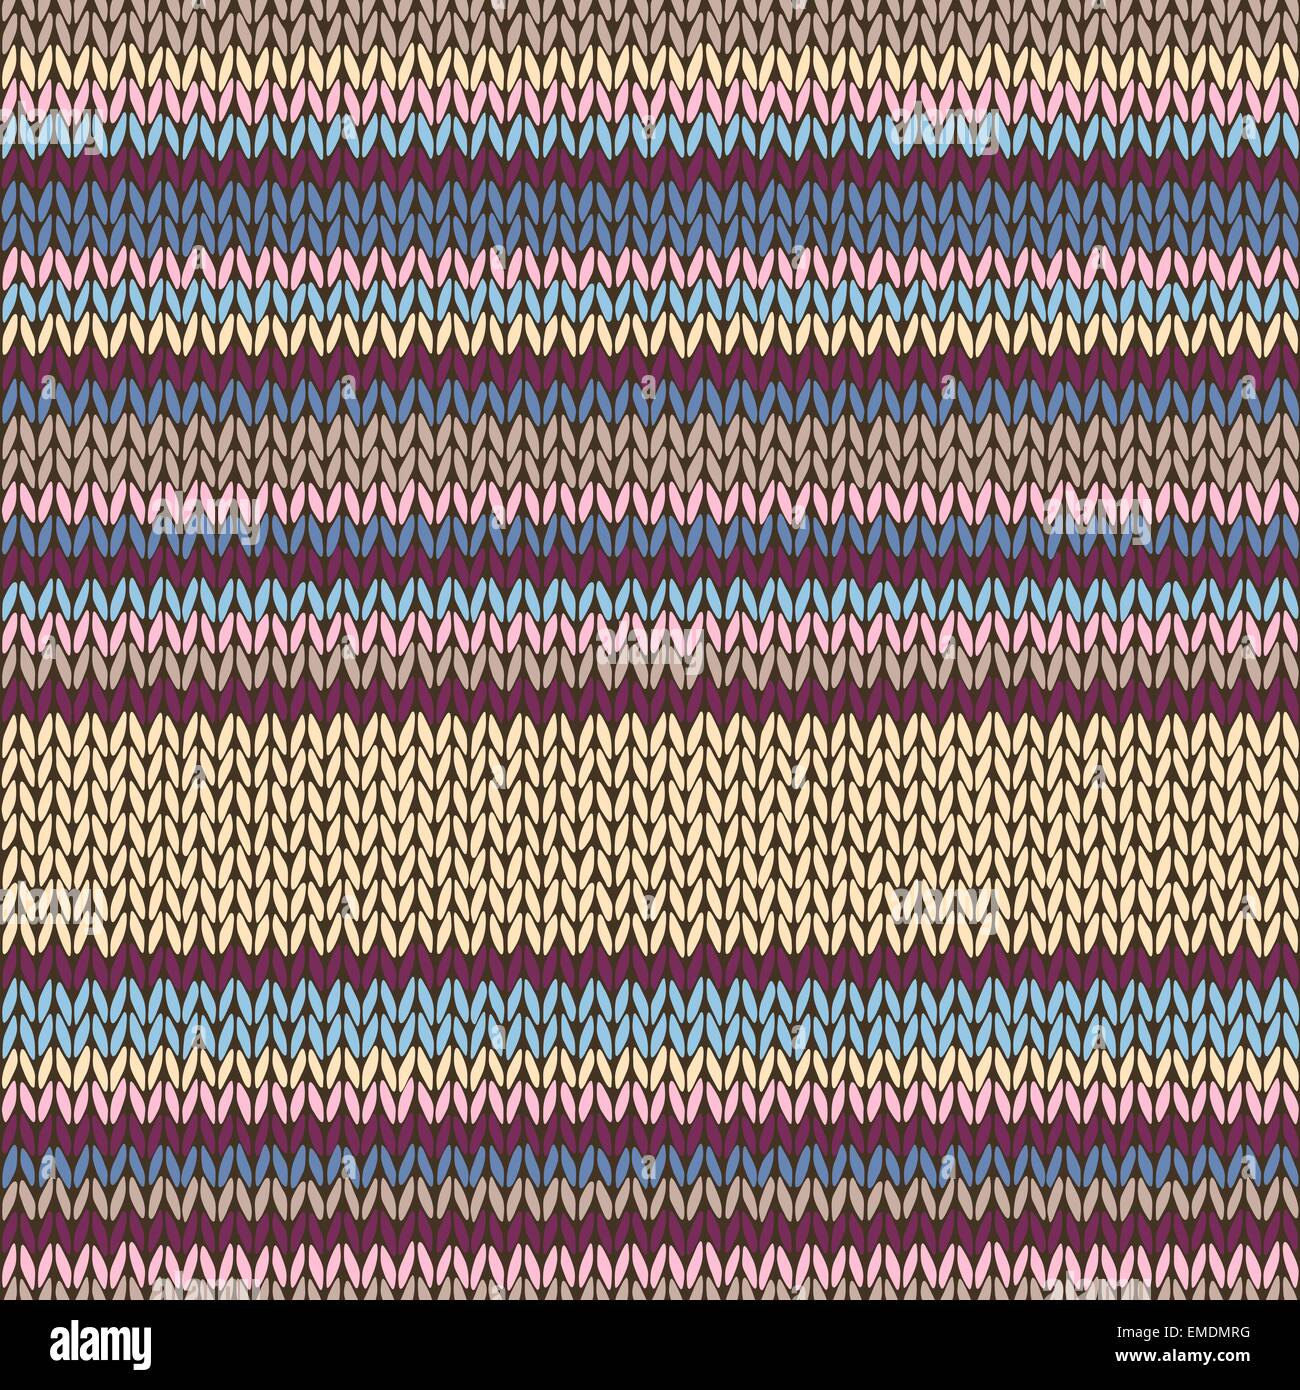 Seamless Color Striped Knitted Pattern Stock Vector